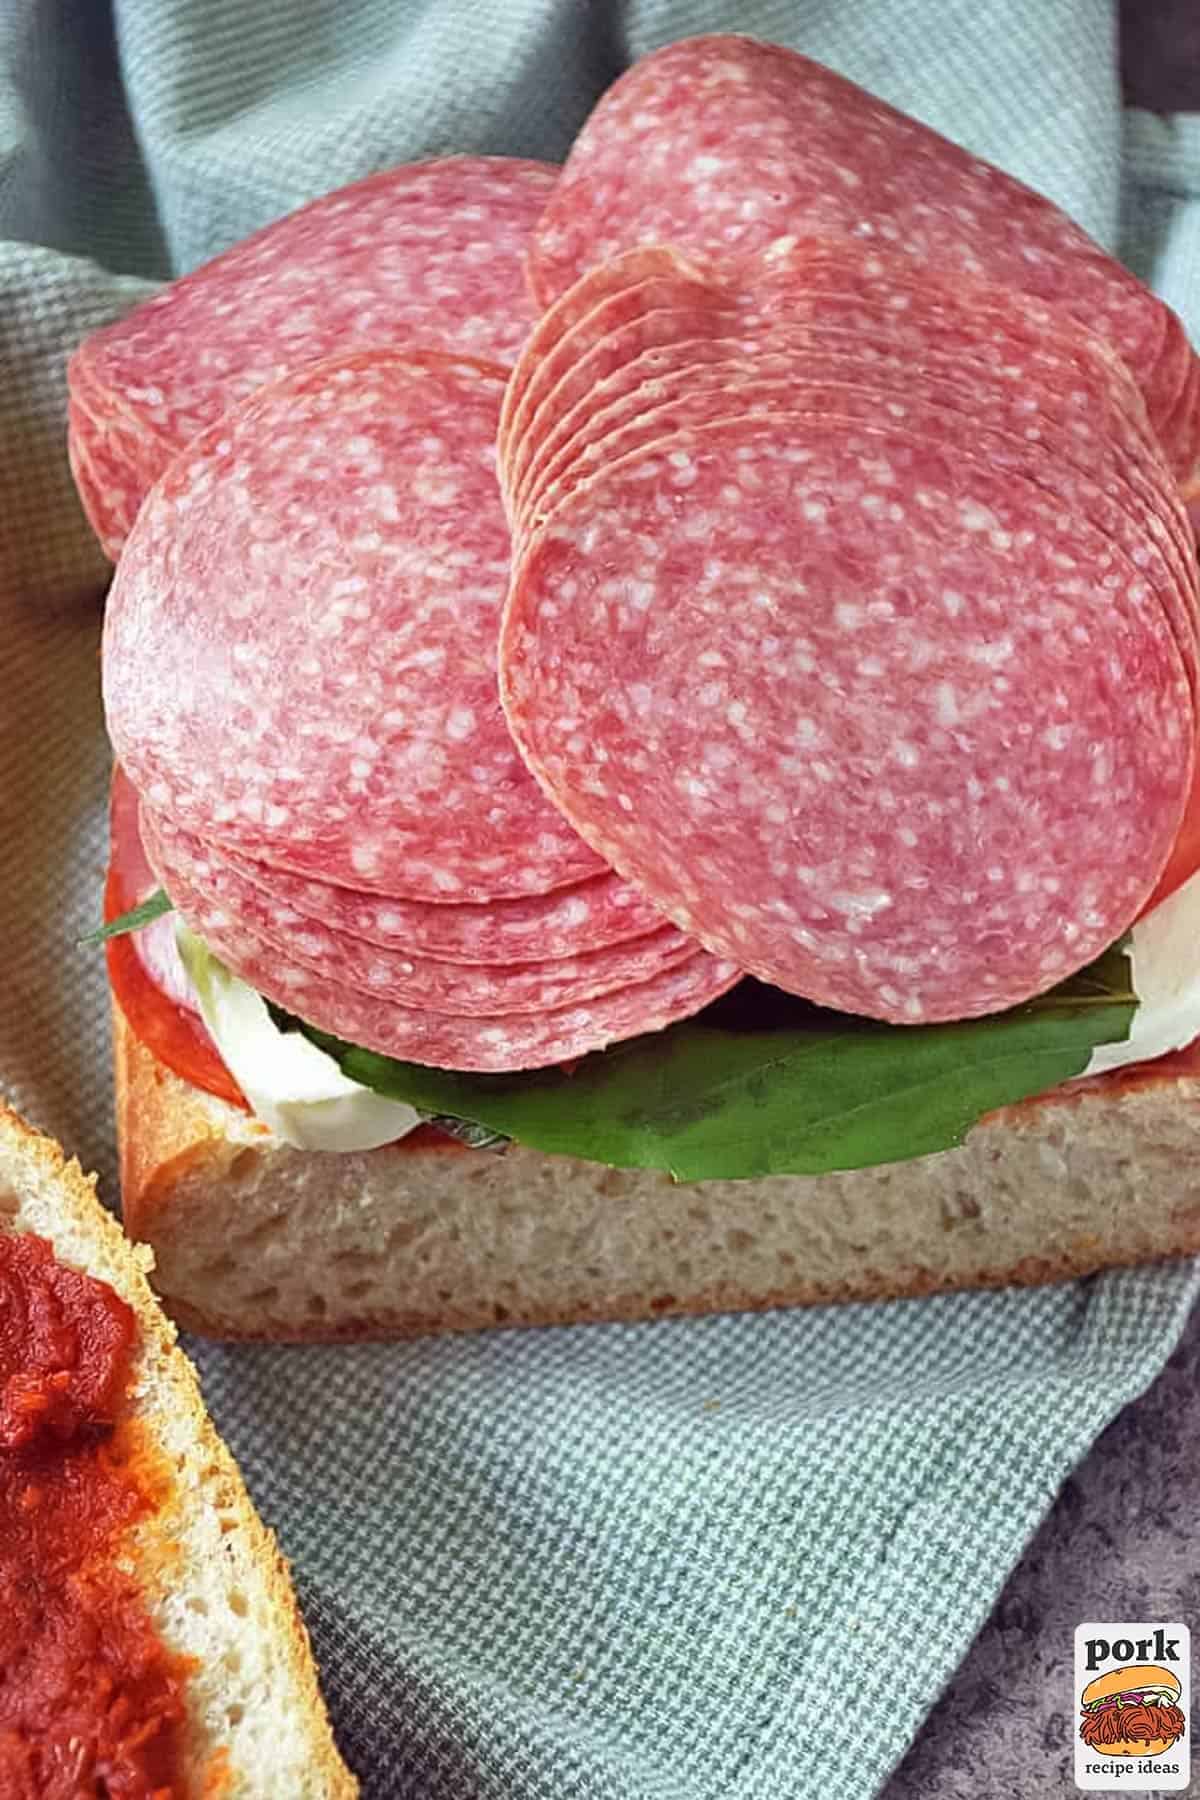 the salami added to the sandwich